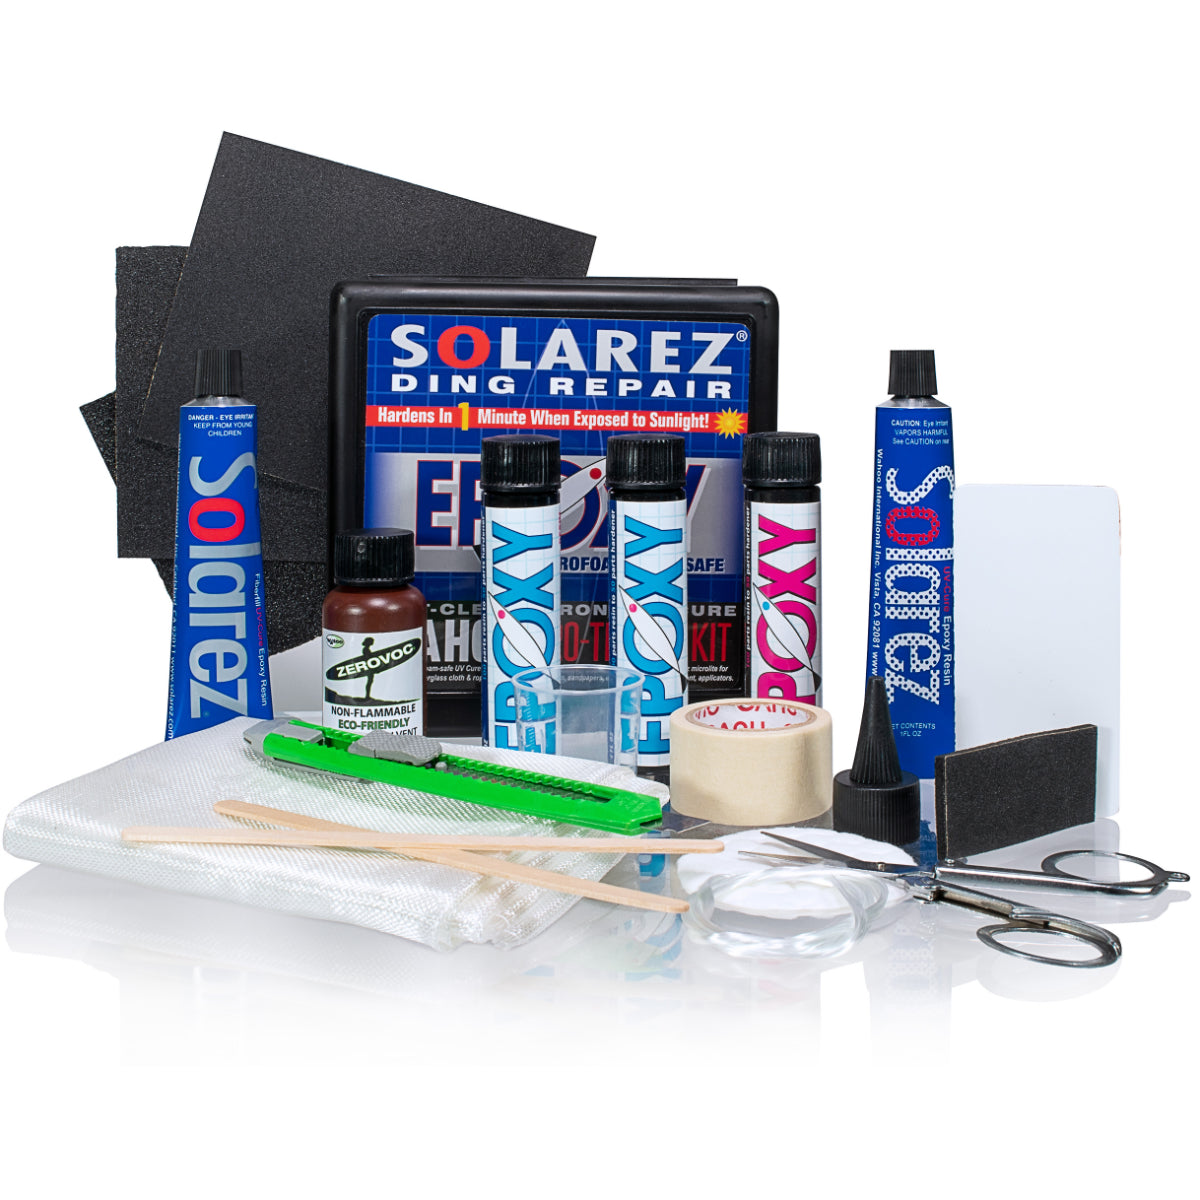 Ding All Epoxy Repair Kit – Chinook Sailing Products